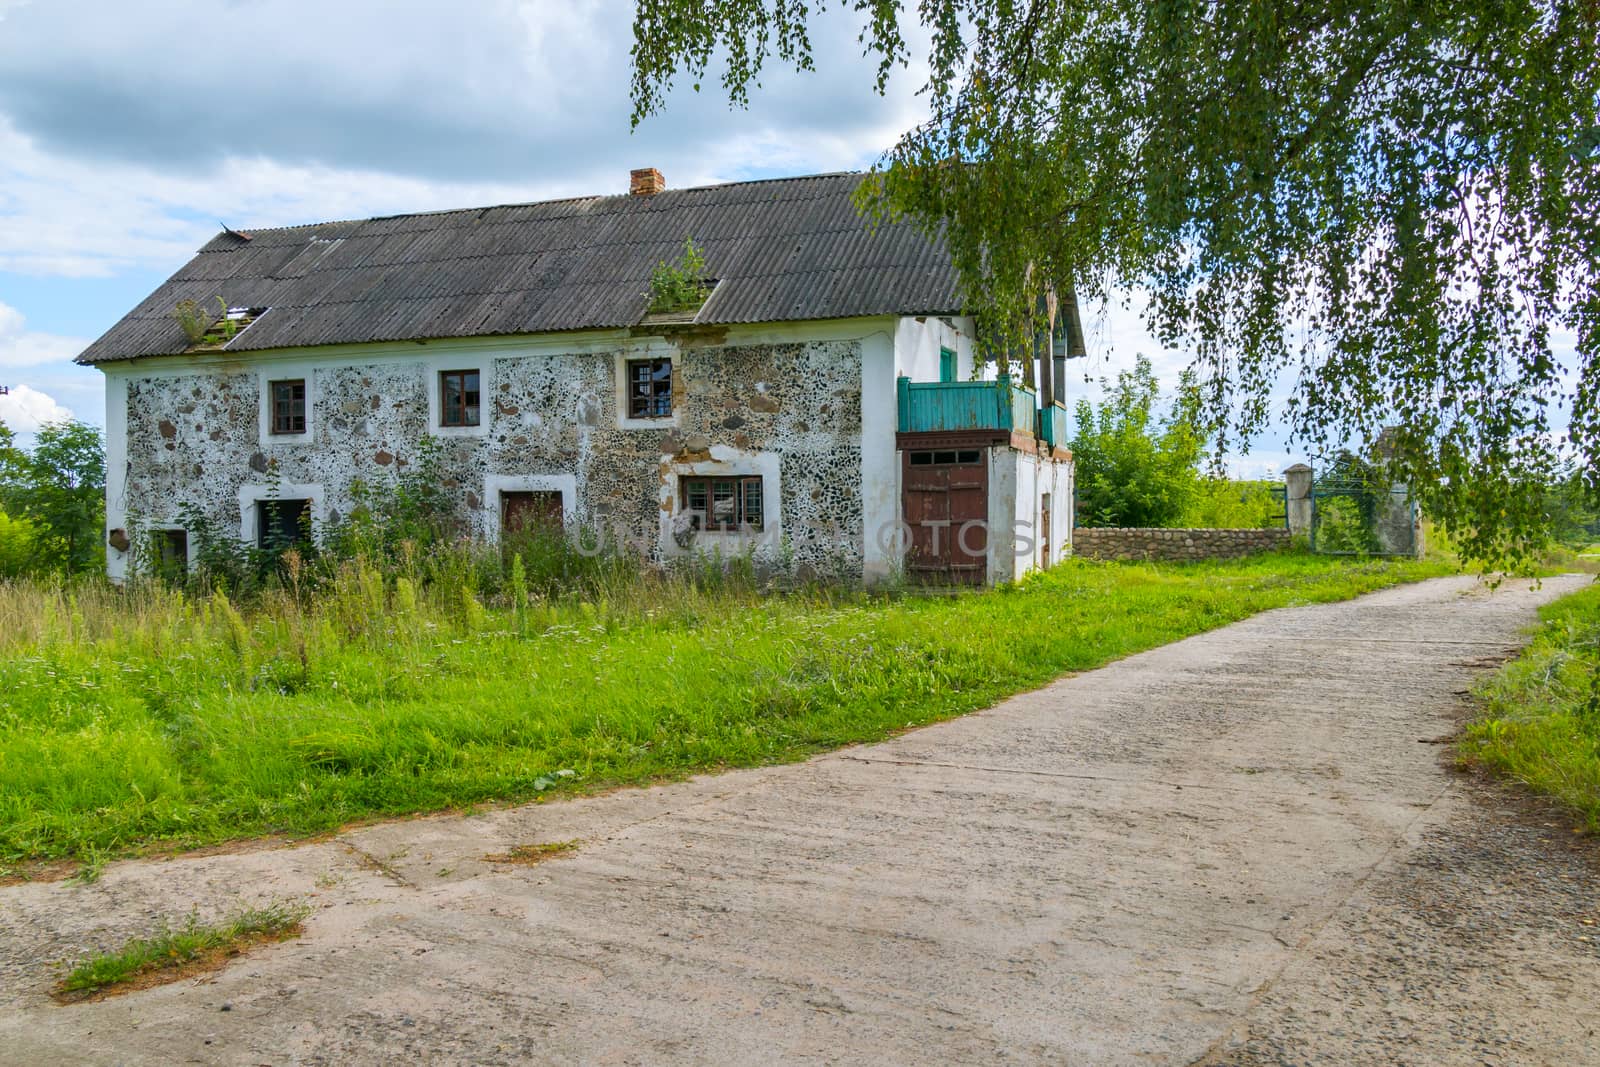 A long wide road is surrounded by grass on the background of abandoned houses and tall, lush trees